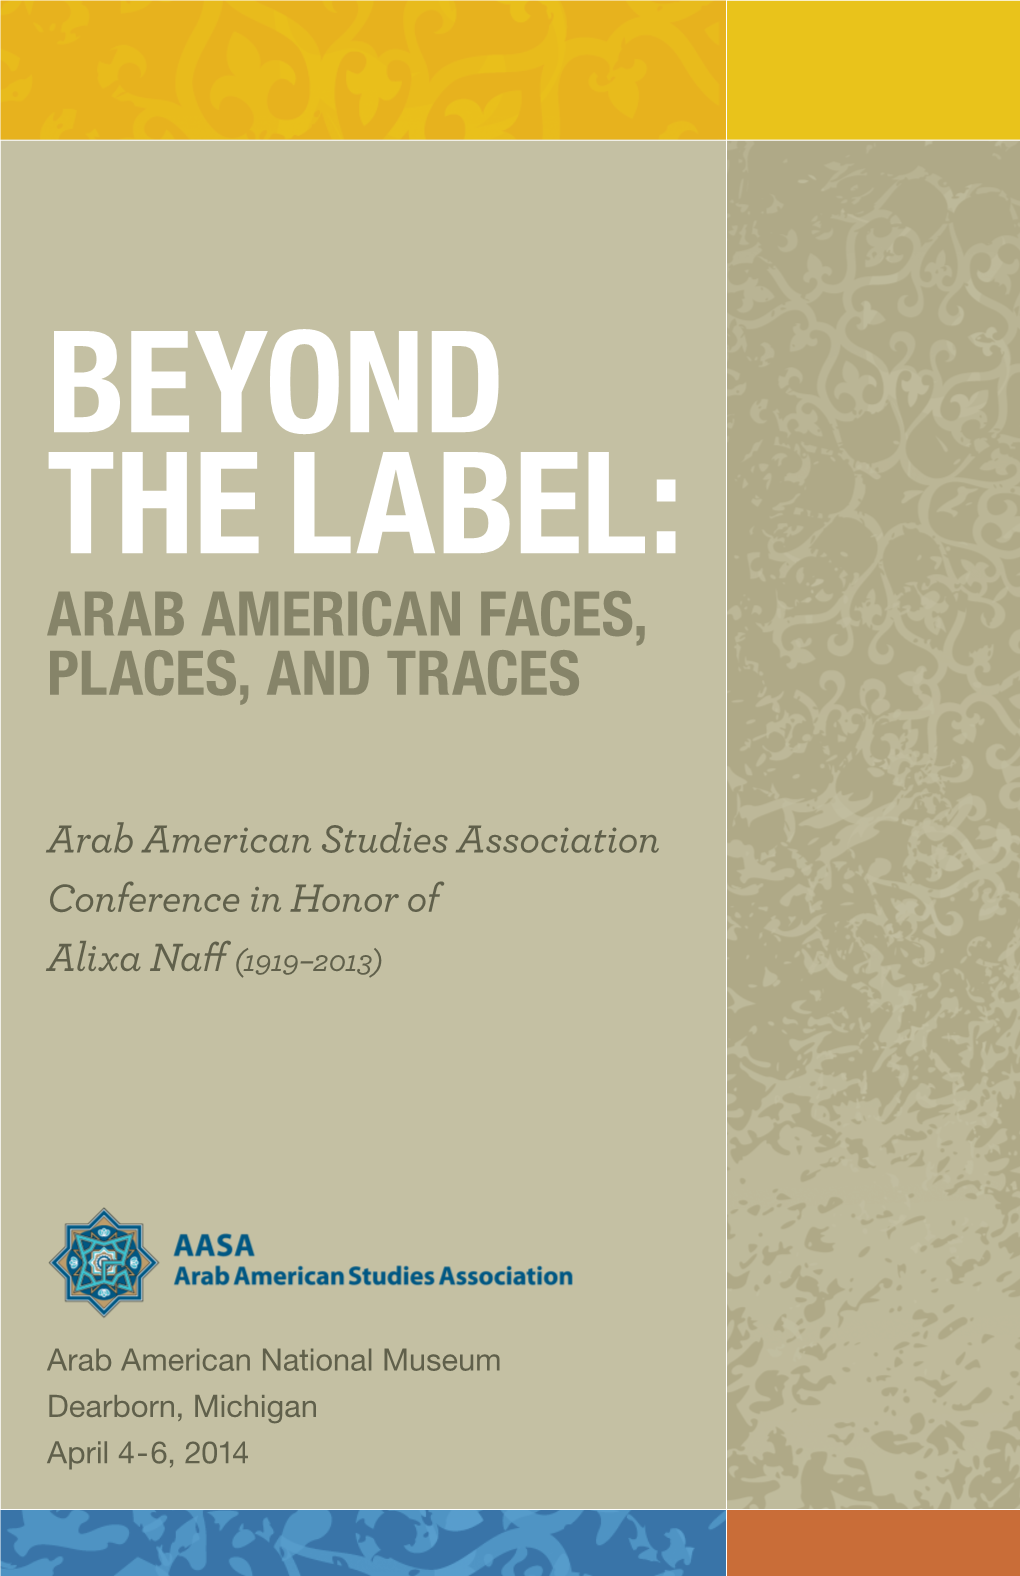 Arab American Faces, Places, and Traces